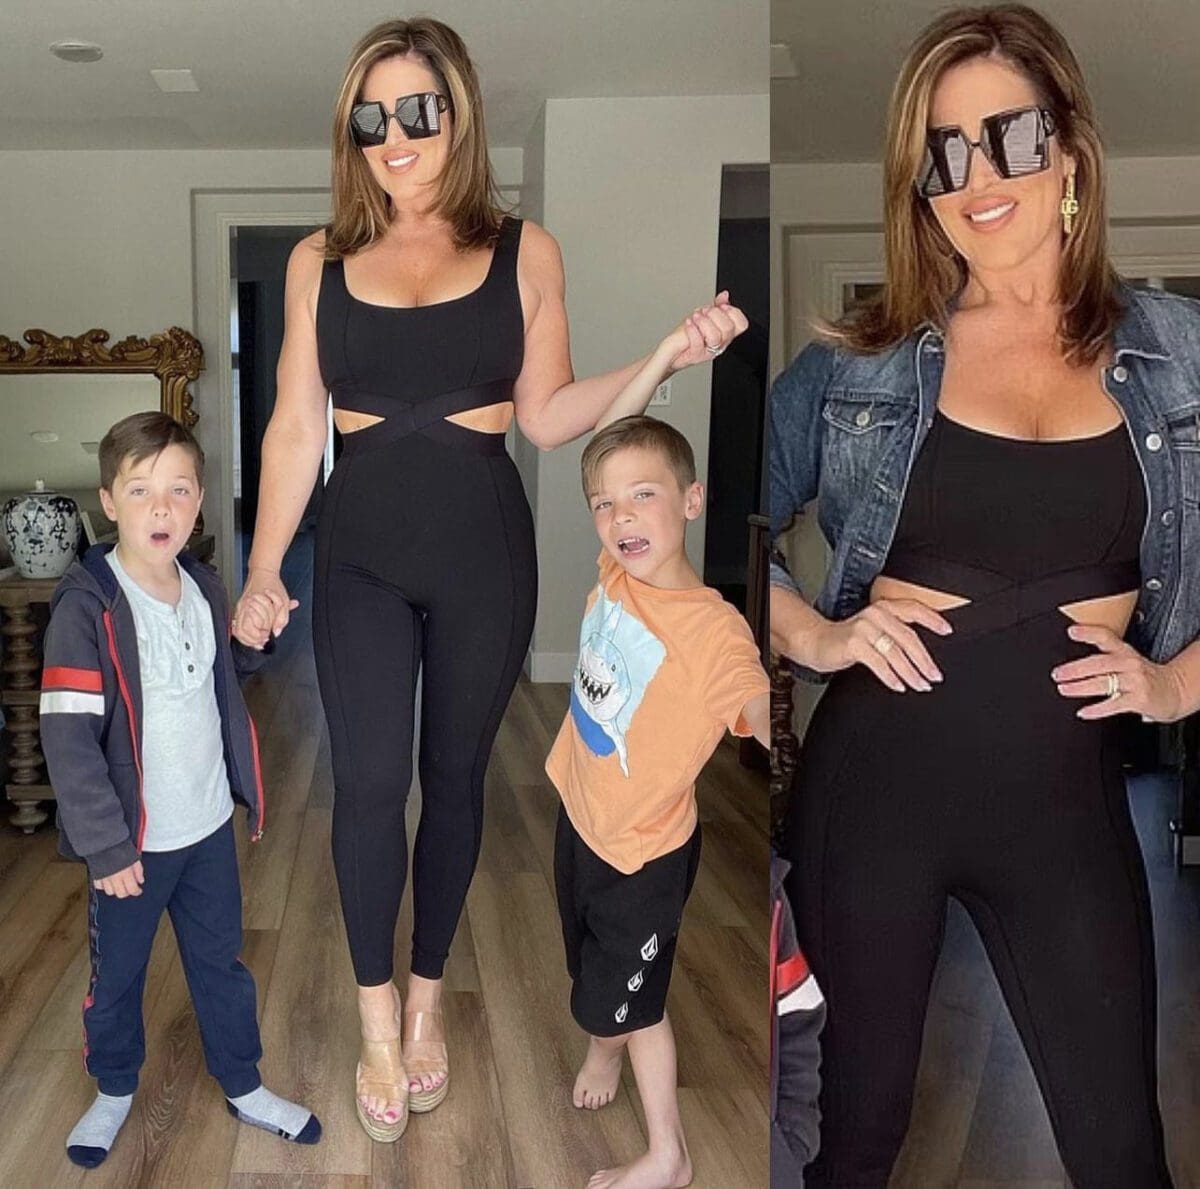 RHOC's Emily Simpson shows off weight loss in tight black outfit with side cutouts